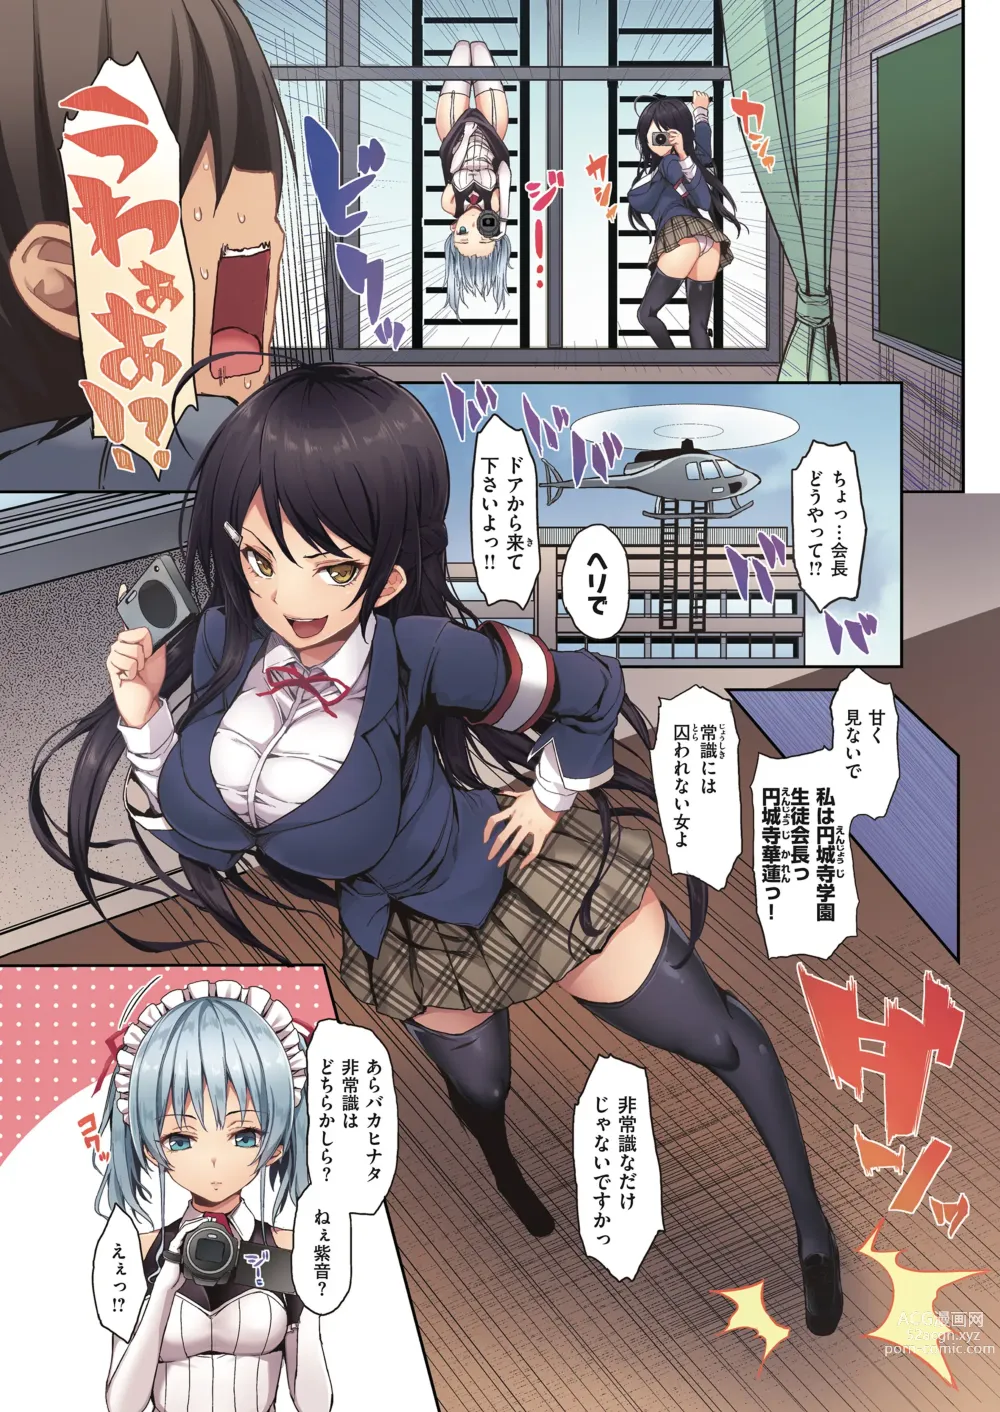 Page 7 of manga Shion Connect